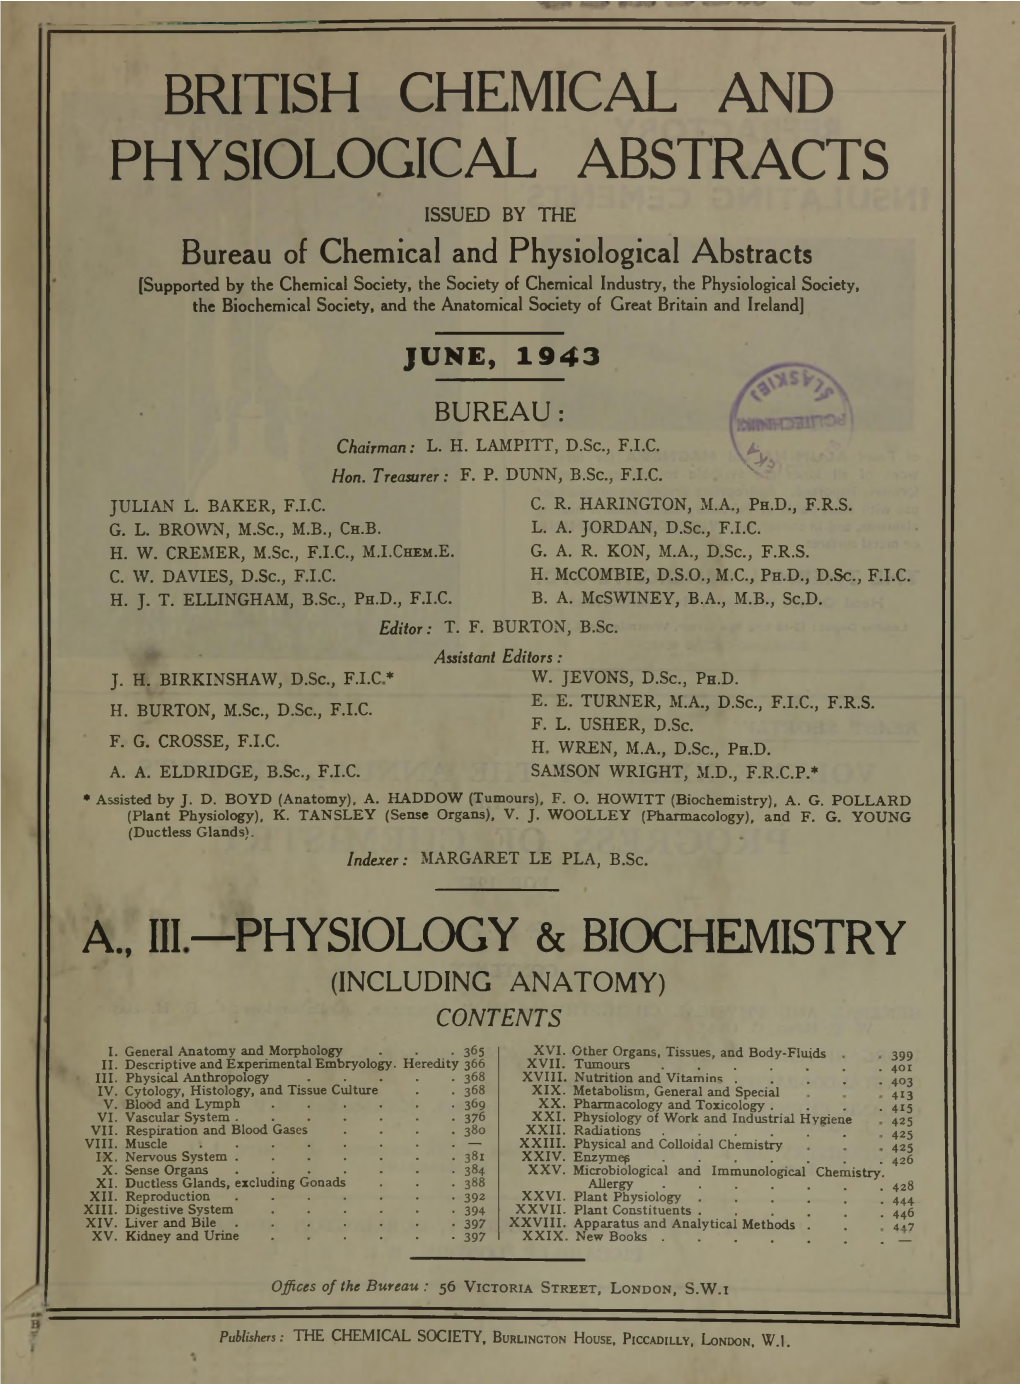 British Chemical and Physiological Abstracts